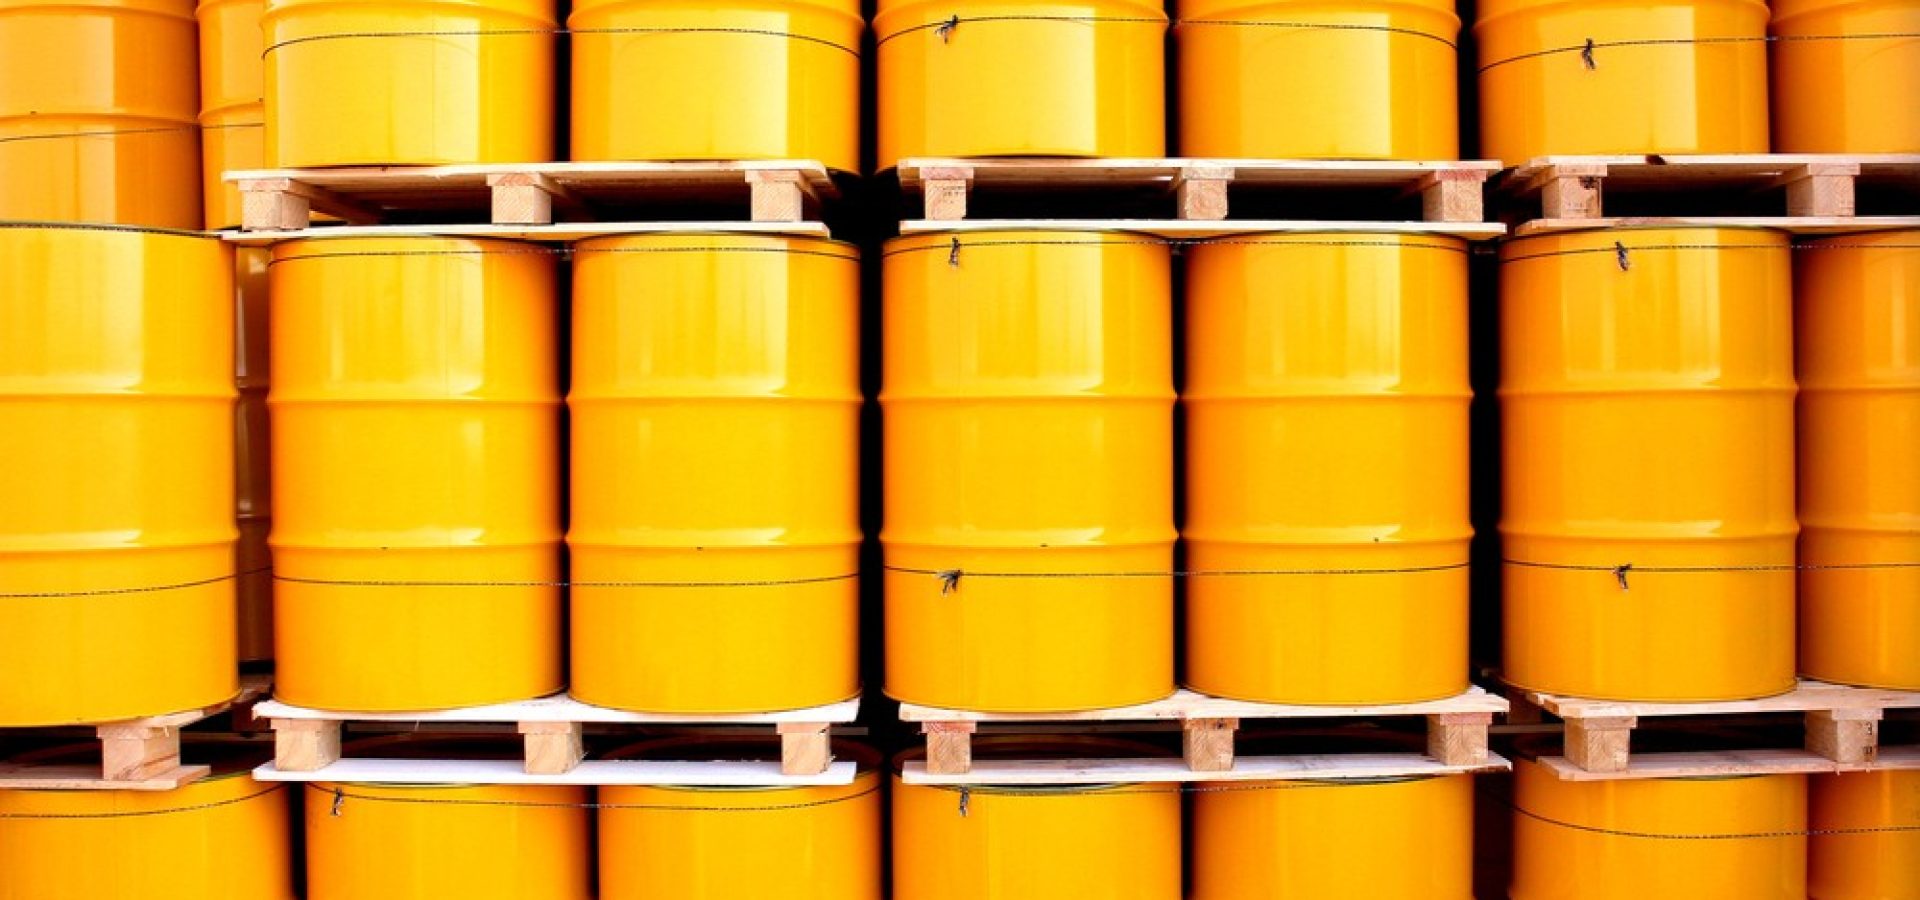 Wibest – Oil petroleum: Yellow oil barrels stacked together.